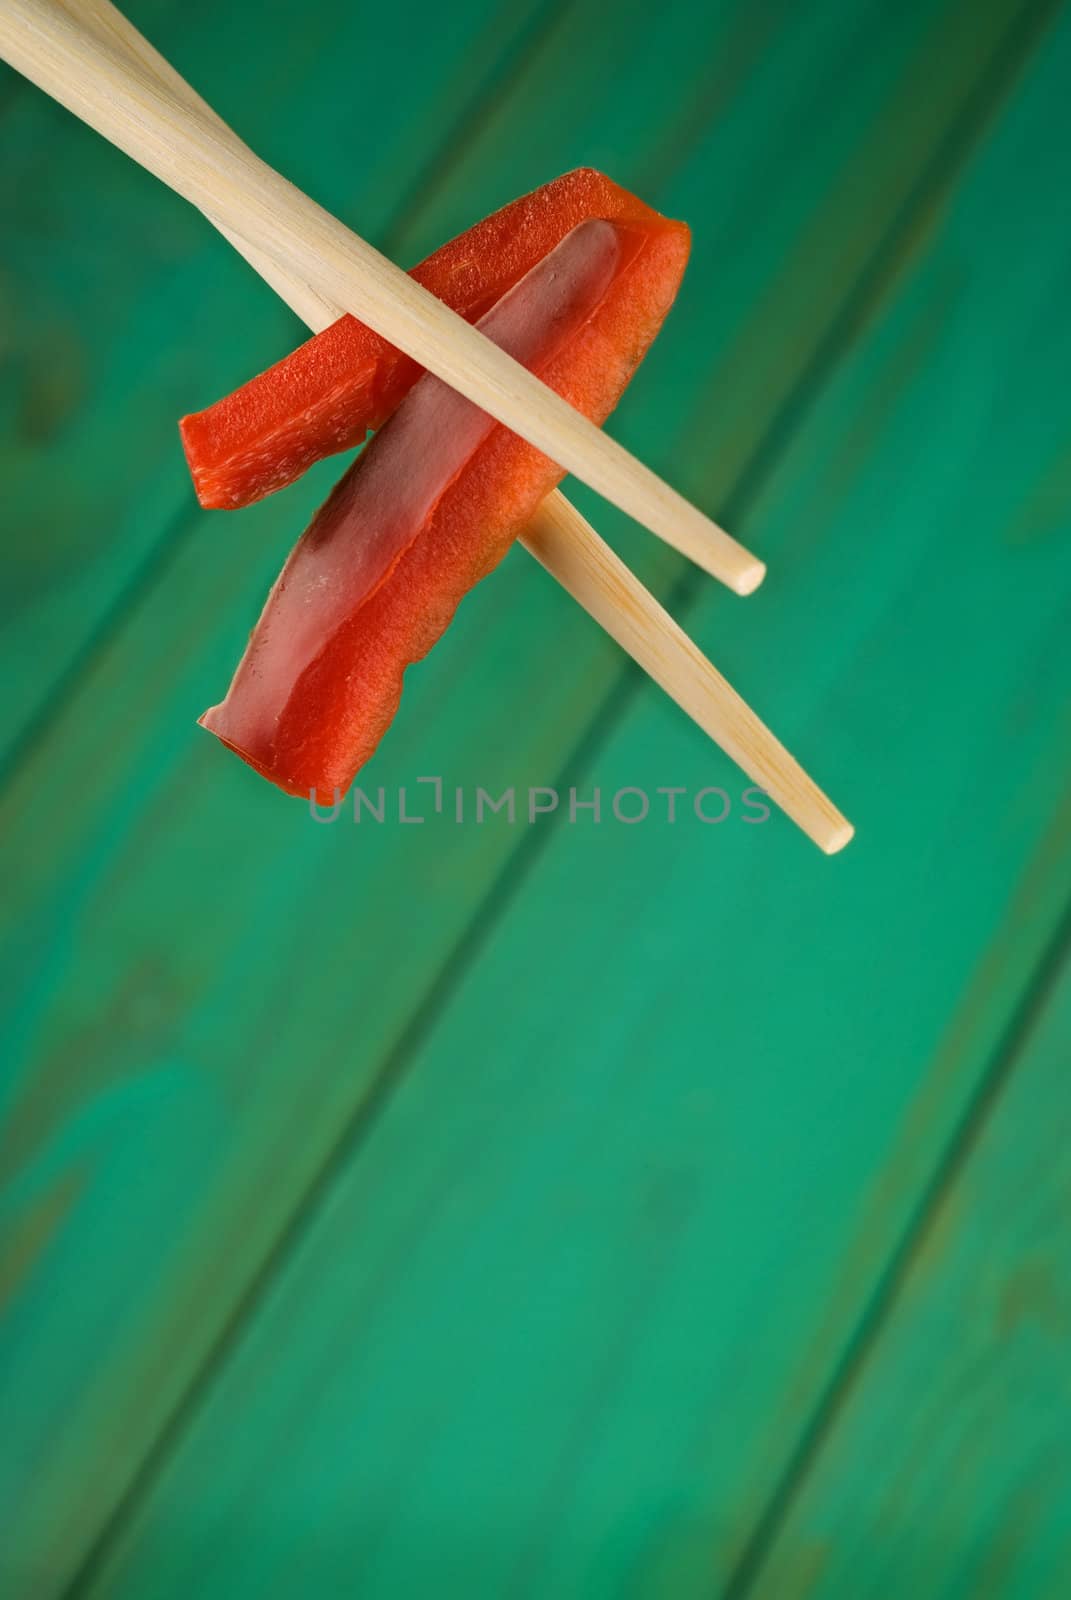 Chopsticks and red peppers by alistaircotton